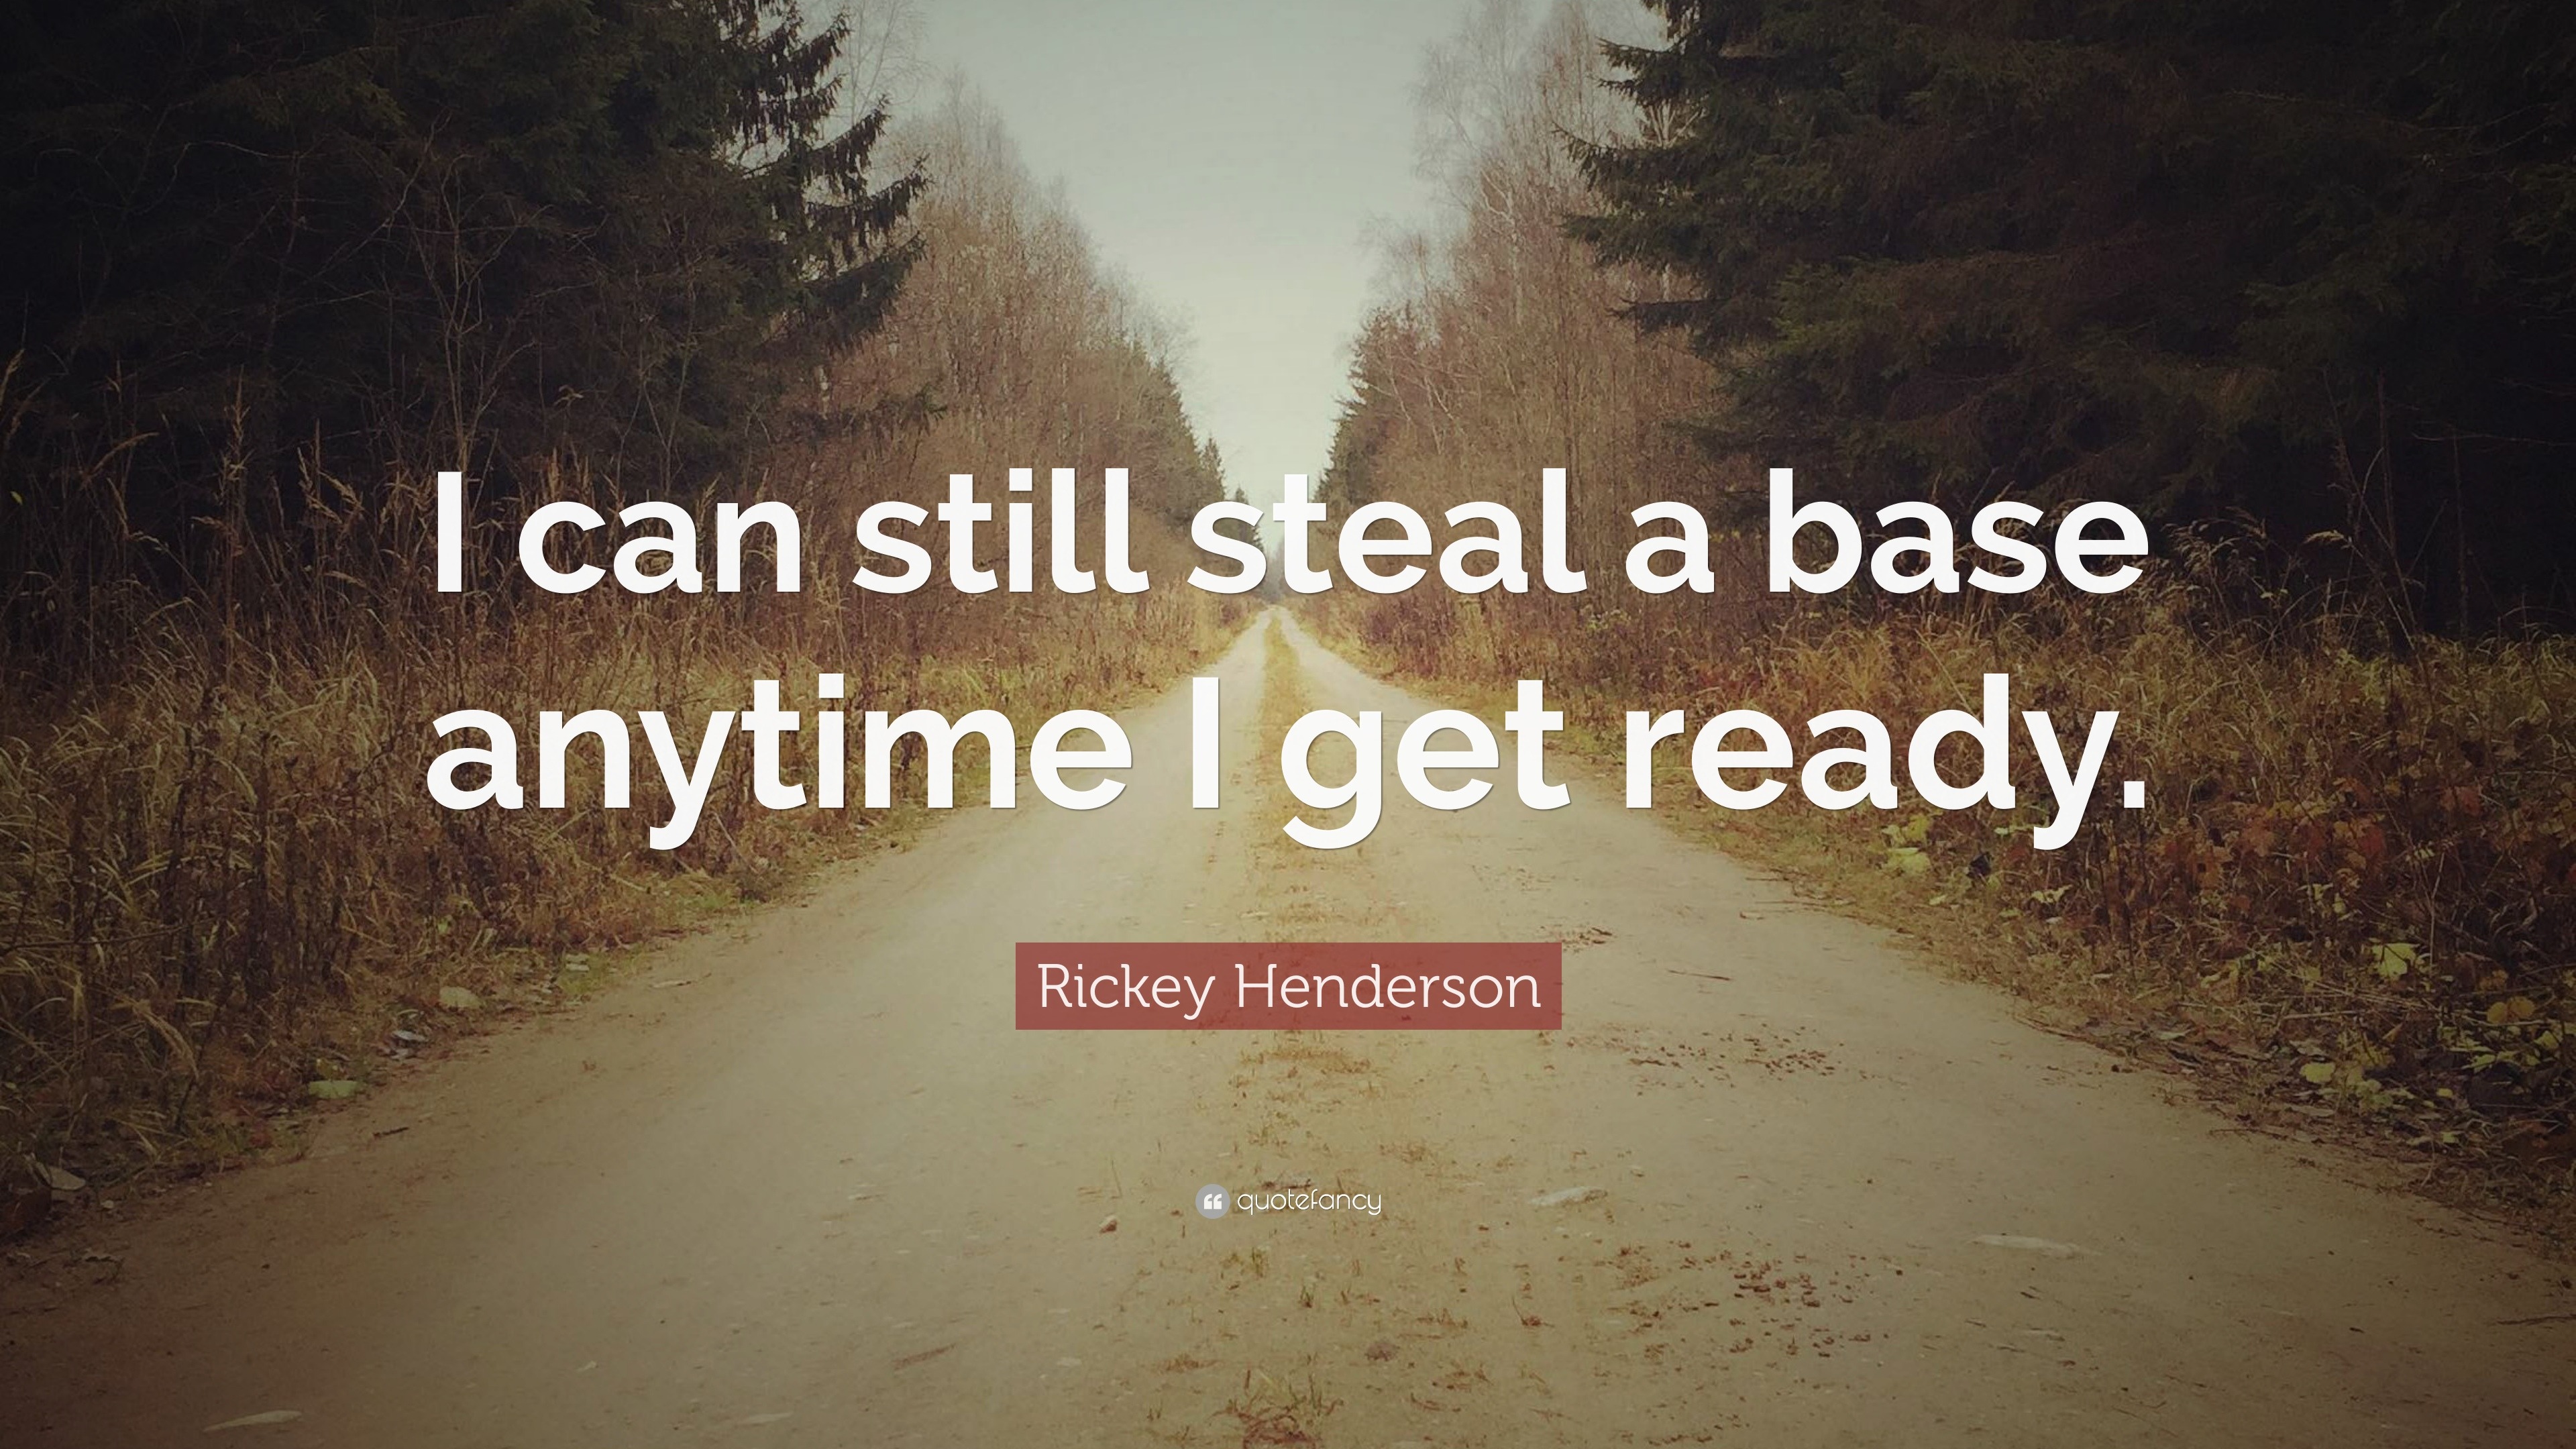 25 Incredible Rickey Henderson quotes & stories, all which may or